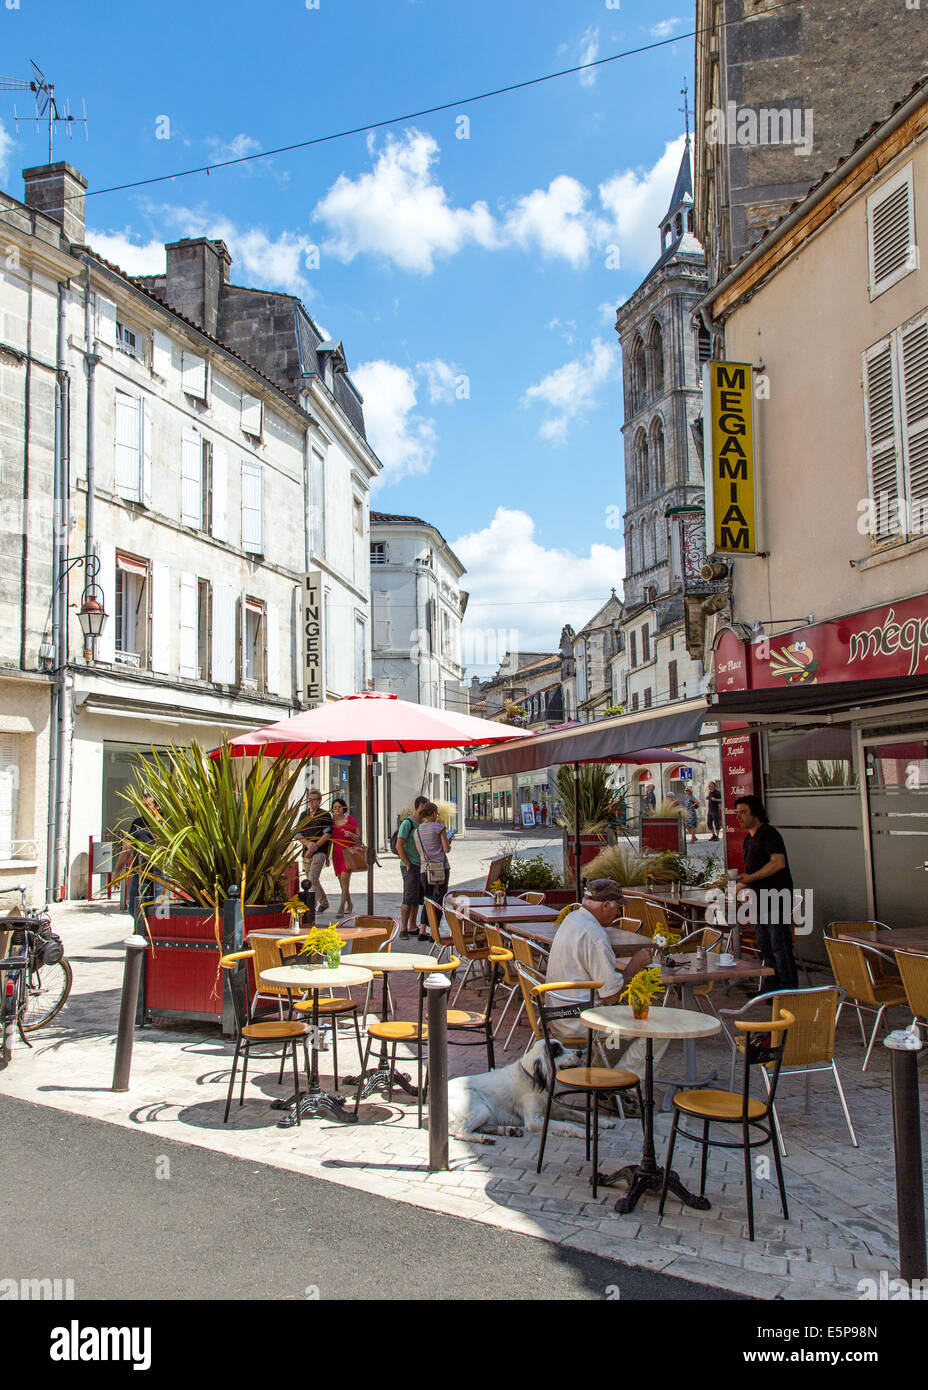 Cafe In The Old City Cognac France Stock Photo